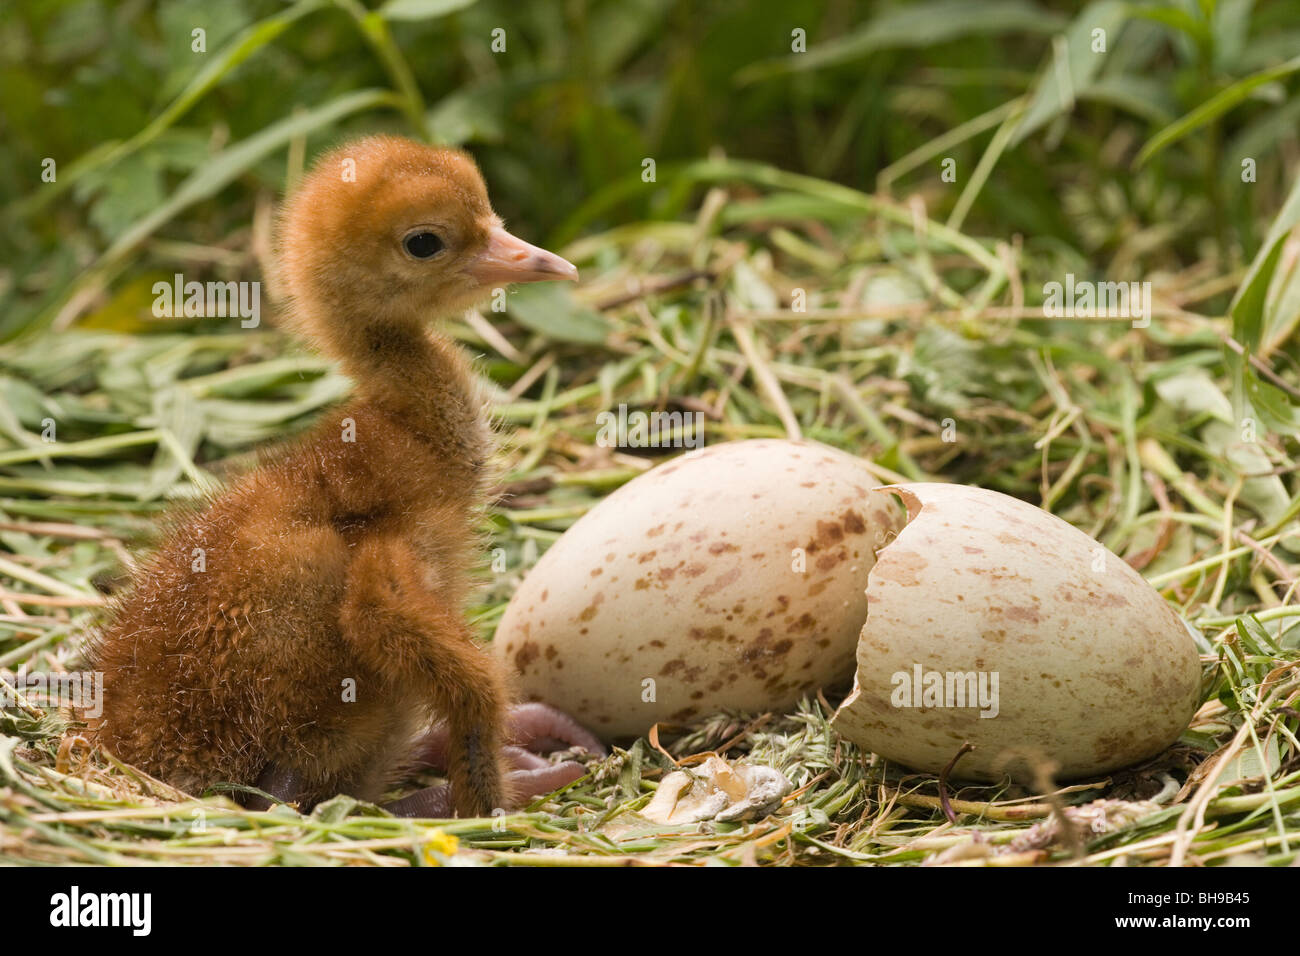 Common, European or Eurasian Crane (Grus grus). Just emerged chick and shell on right, with second egg middle, still to hatch. Stock Photo